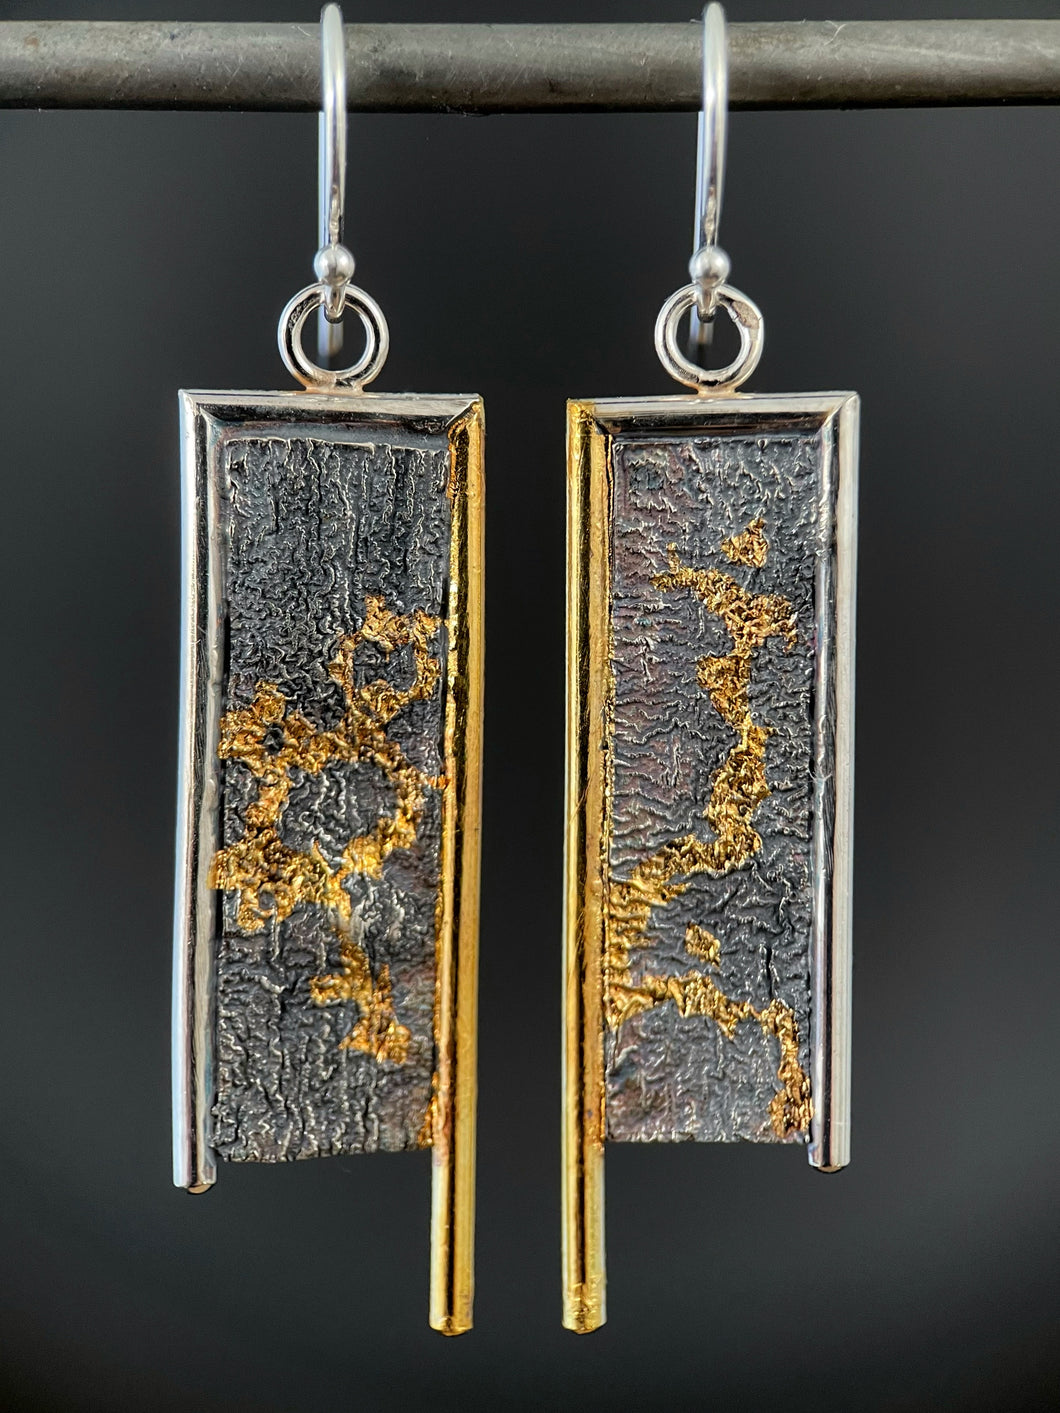 A rectangular pair of earrings, hanging vertically. The top and both sides are framed in wire - silver on the top and outside edge, gold on the inside. The gold border on each earring hangs lower, with the silver dropping just below the edge of the rectangle. The center of the earring is reticulated silver, in a terrain-like pattern. Both earrings have a winding, branching pattern of gold in their recessed portions.